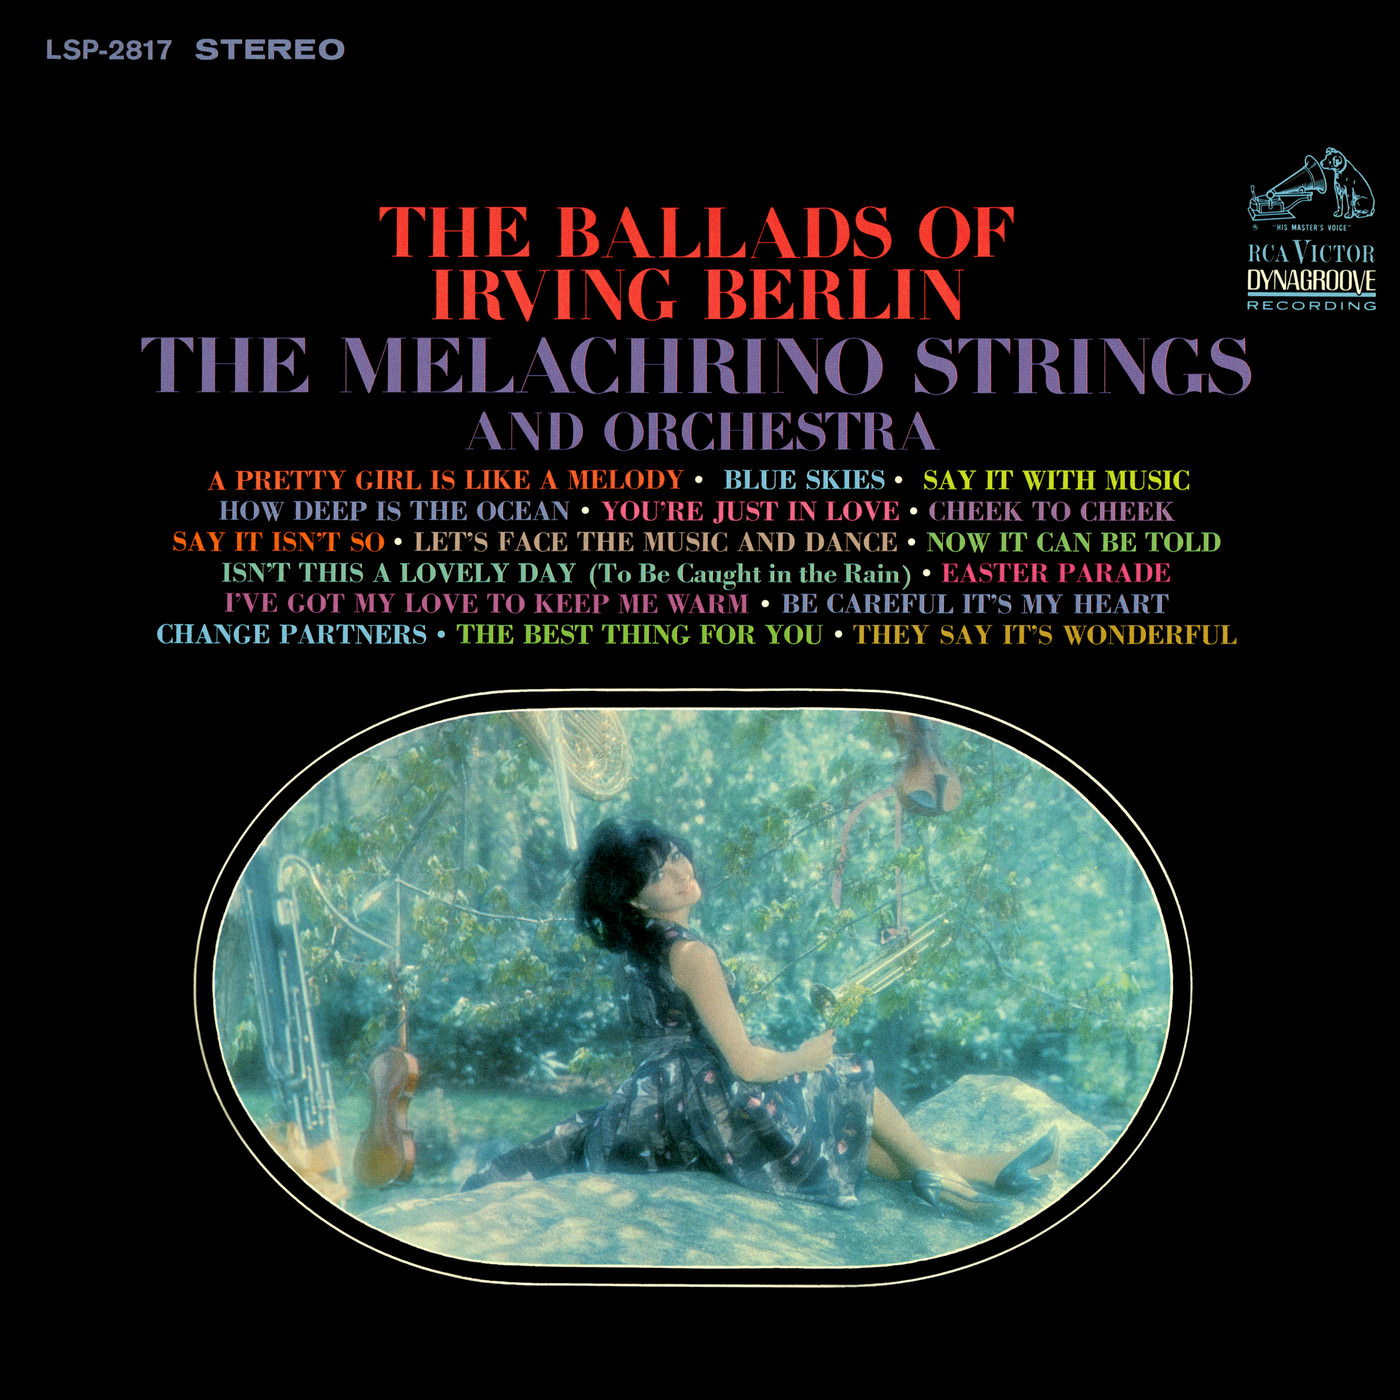 The Melachrino Strings and Orchestra – The Ballads Of Irving Berlin (1968/2018) [AcousticSounds FLAC 24bit/192kHz]